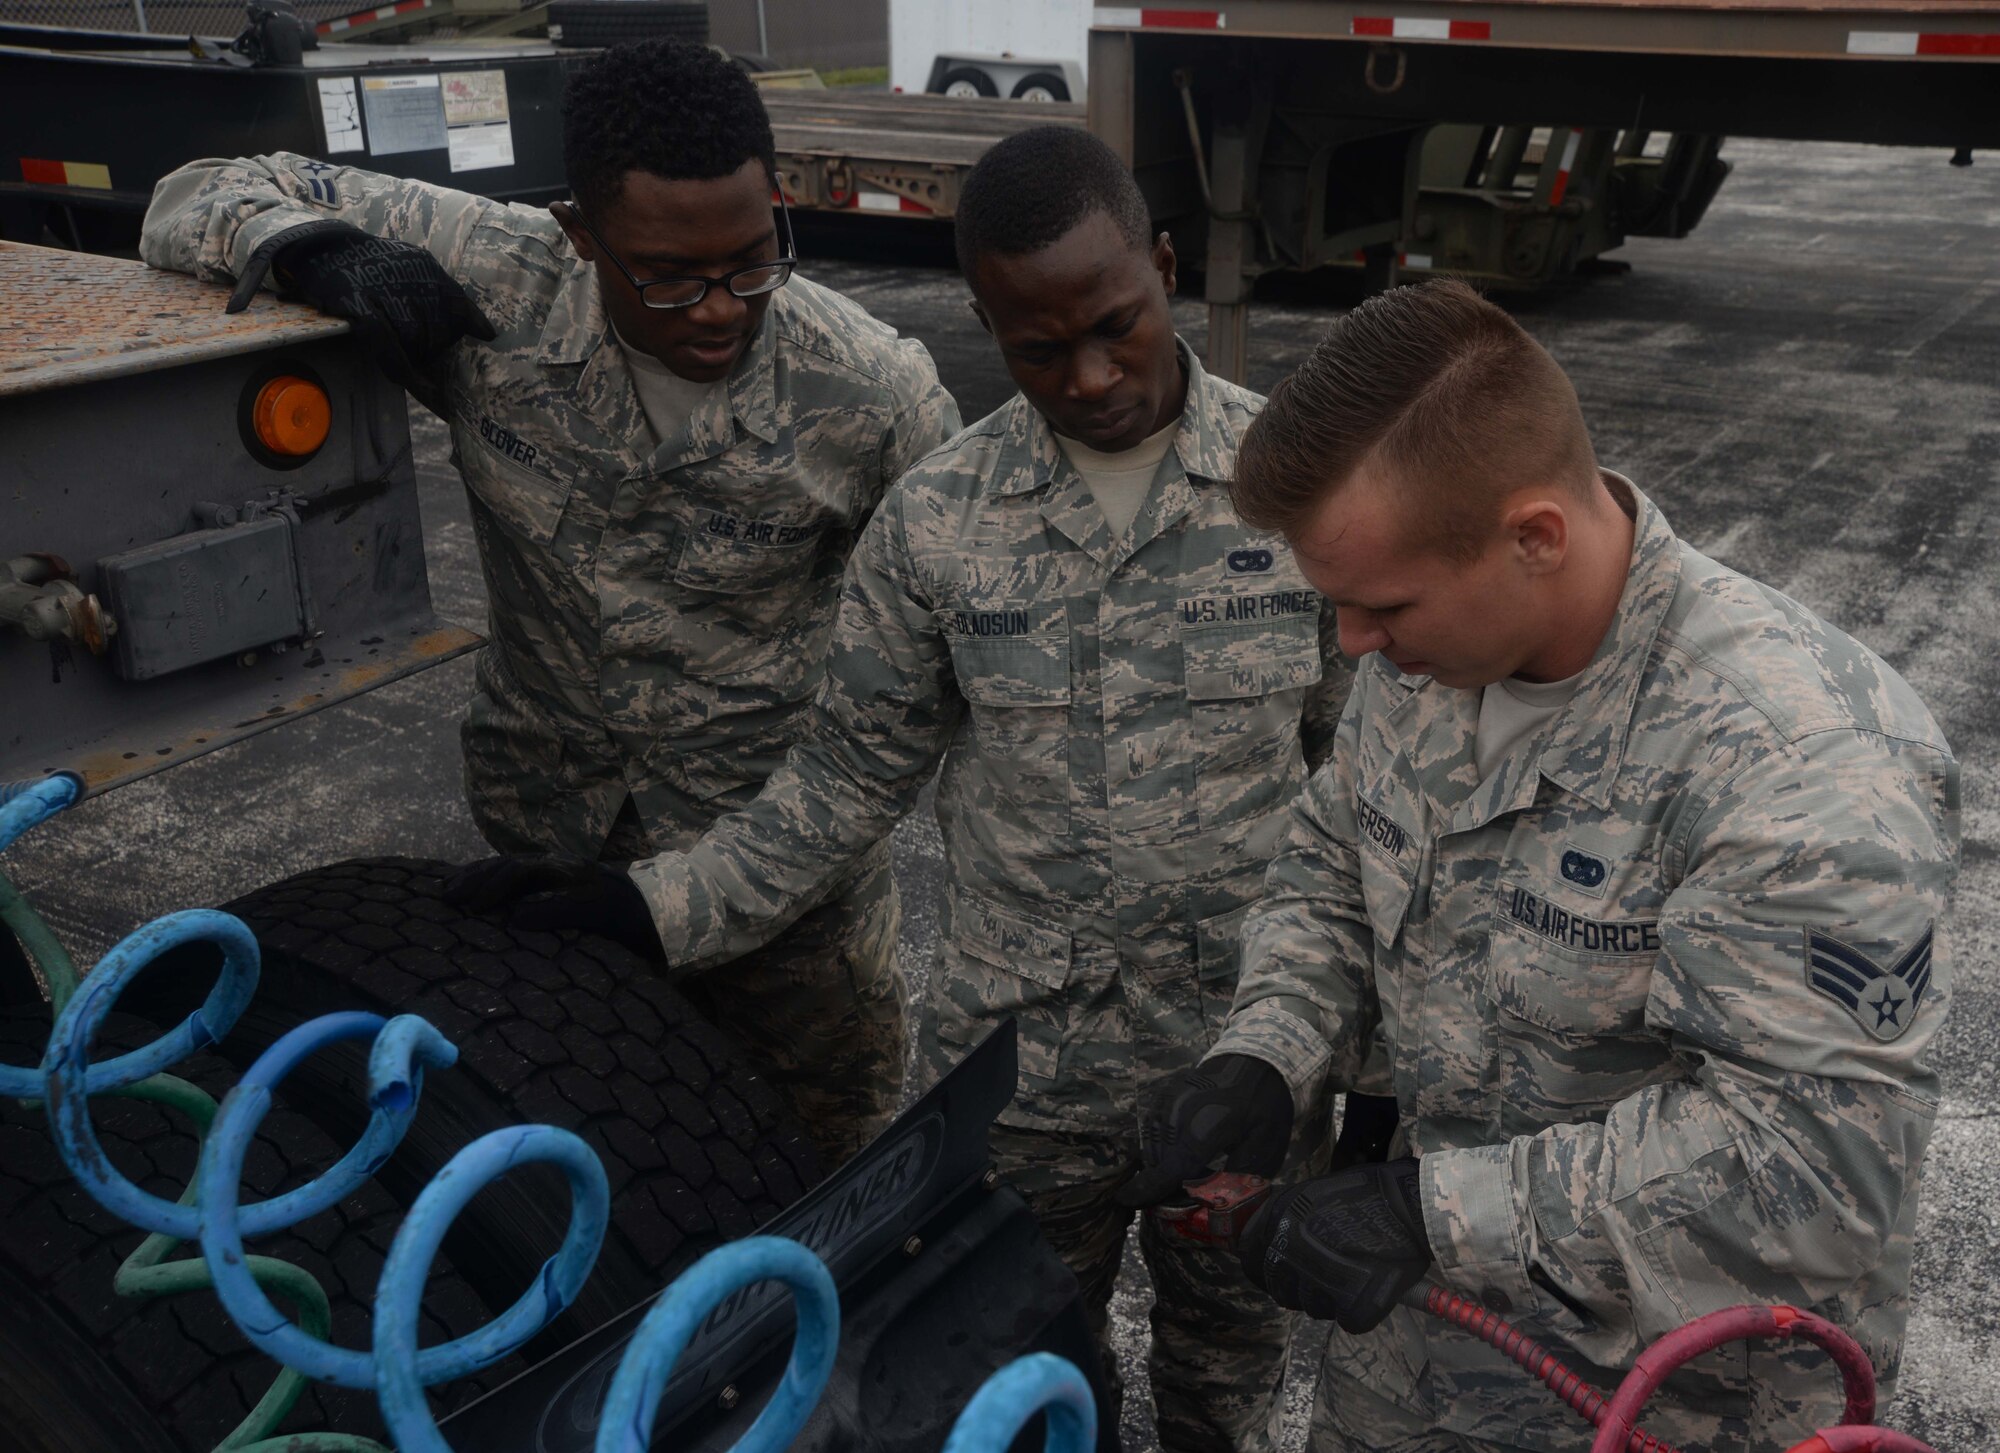 U.S Air Force vehicle operators assigned to the 6th Logistics Readiness Squadron train on how to properly attach a trailer to a tractor on MacDill Air Force Base, Fla. Oct. 17, 2017.